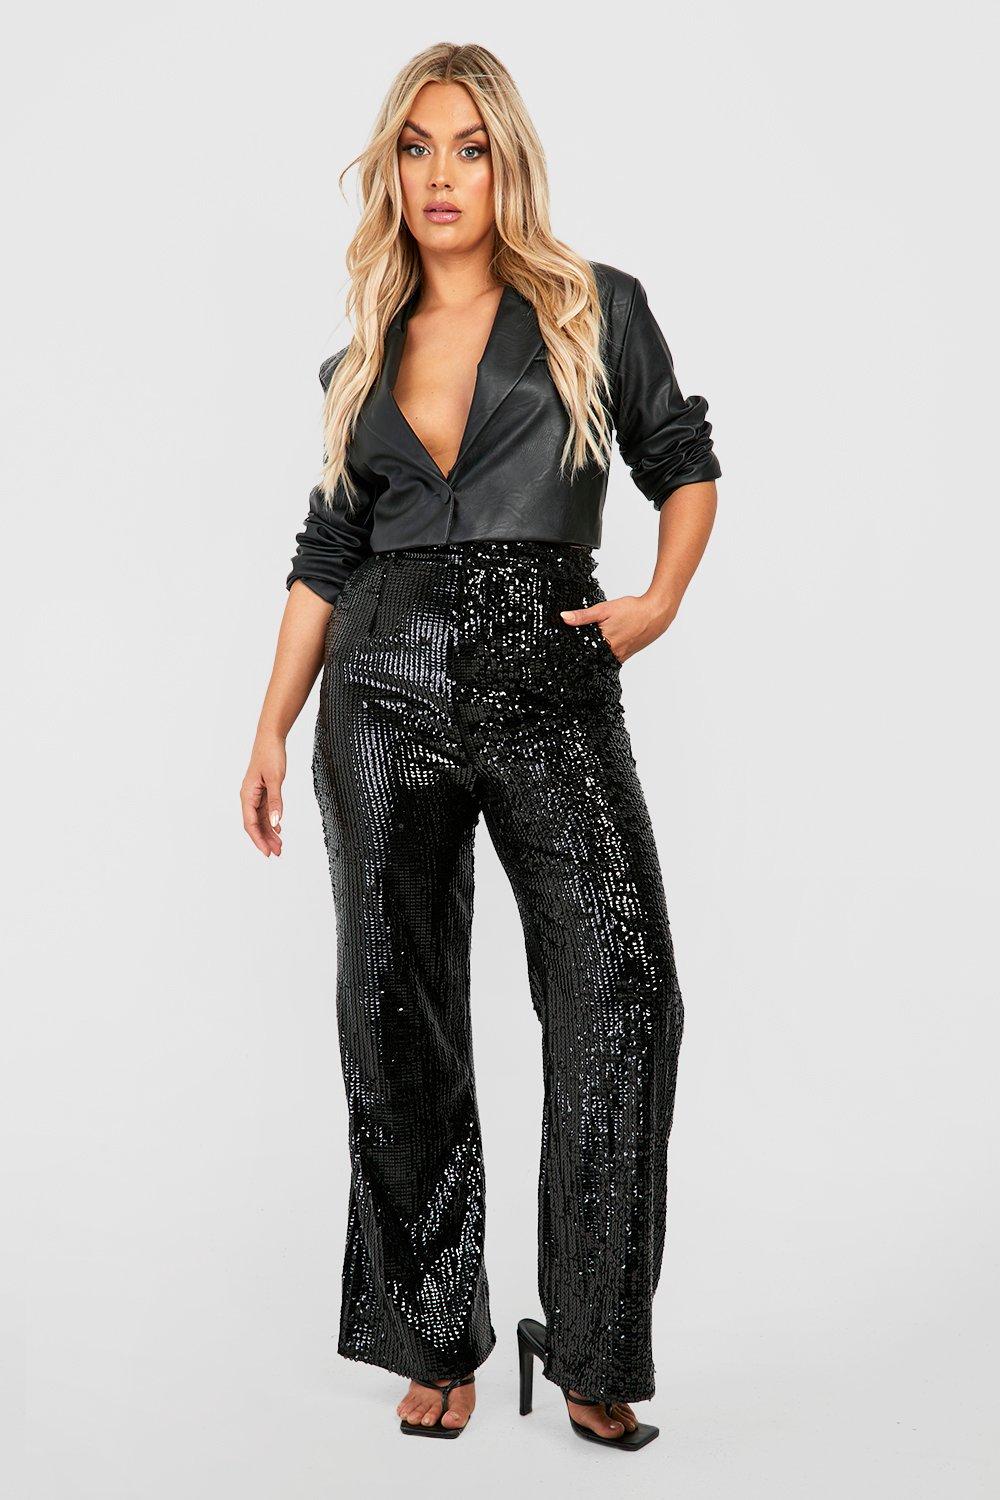 Sequin Pants for Women High Waisted Club Wear Straight Wide Leg 80s Trousers  Costume Loose Fitting Solid Color (XX-Large, Black) - Walmart.com